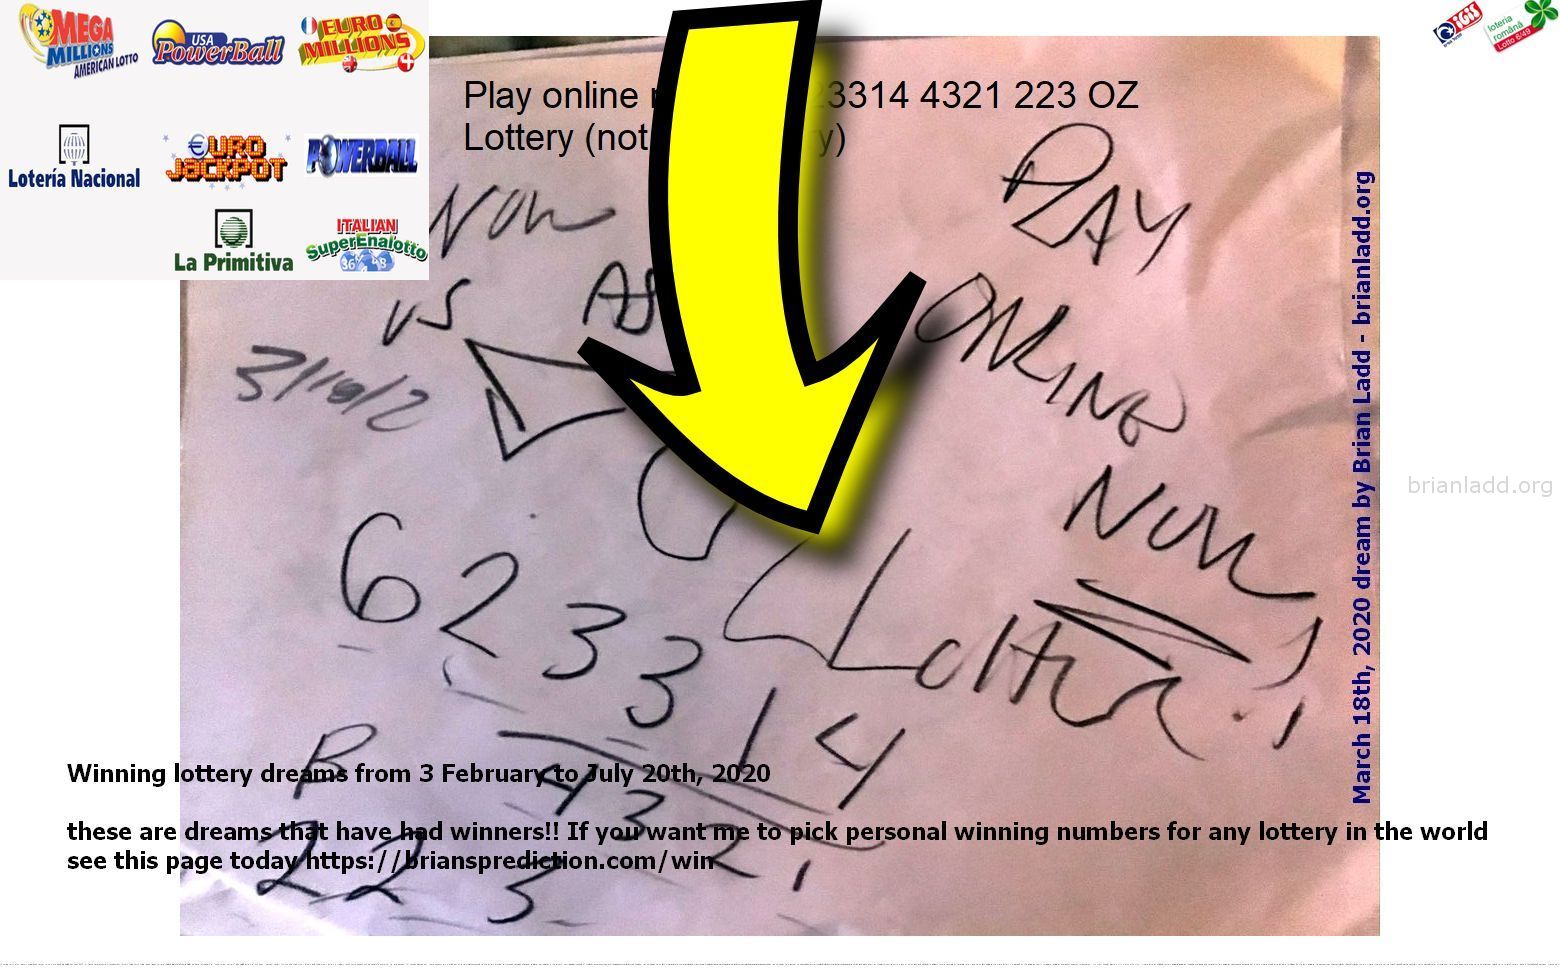 Winning Lottery Dreams From The 3Rd Of February To July 20Th 2020 These Are Dreams That Have Had Winners21 Dream Info 12...
Winning Lottery Dreams From 3 February To July 20th, 2020 - These Are Dreams That Have Had Winners!! If You Want Me To Pick Personal Winning Numbers For Any Lottery In The World See This Page Today  https://briansprediction.com/Win  ( NEW!  Free lottery picks by mail, I will personally fill out your blank lottery sheet and mail it back to you for free, postage is included!  visit  https://briansprediction.com/picksbymail   )
